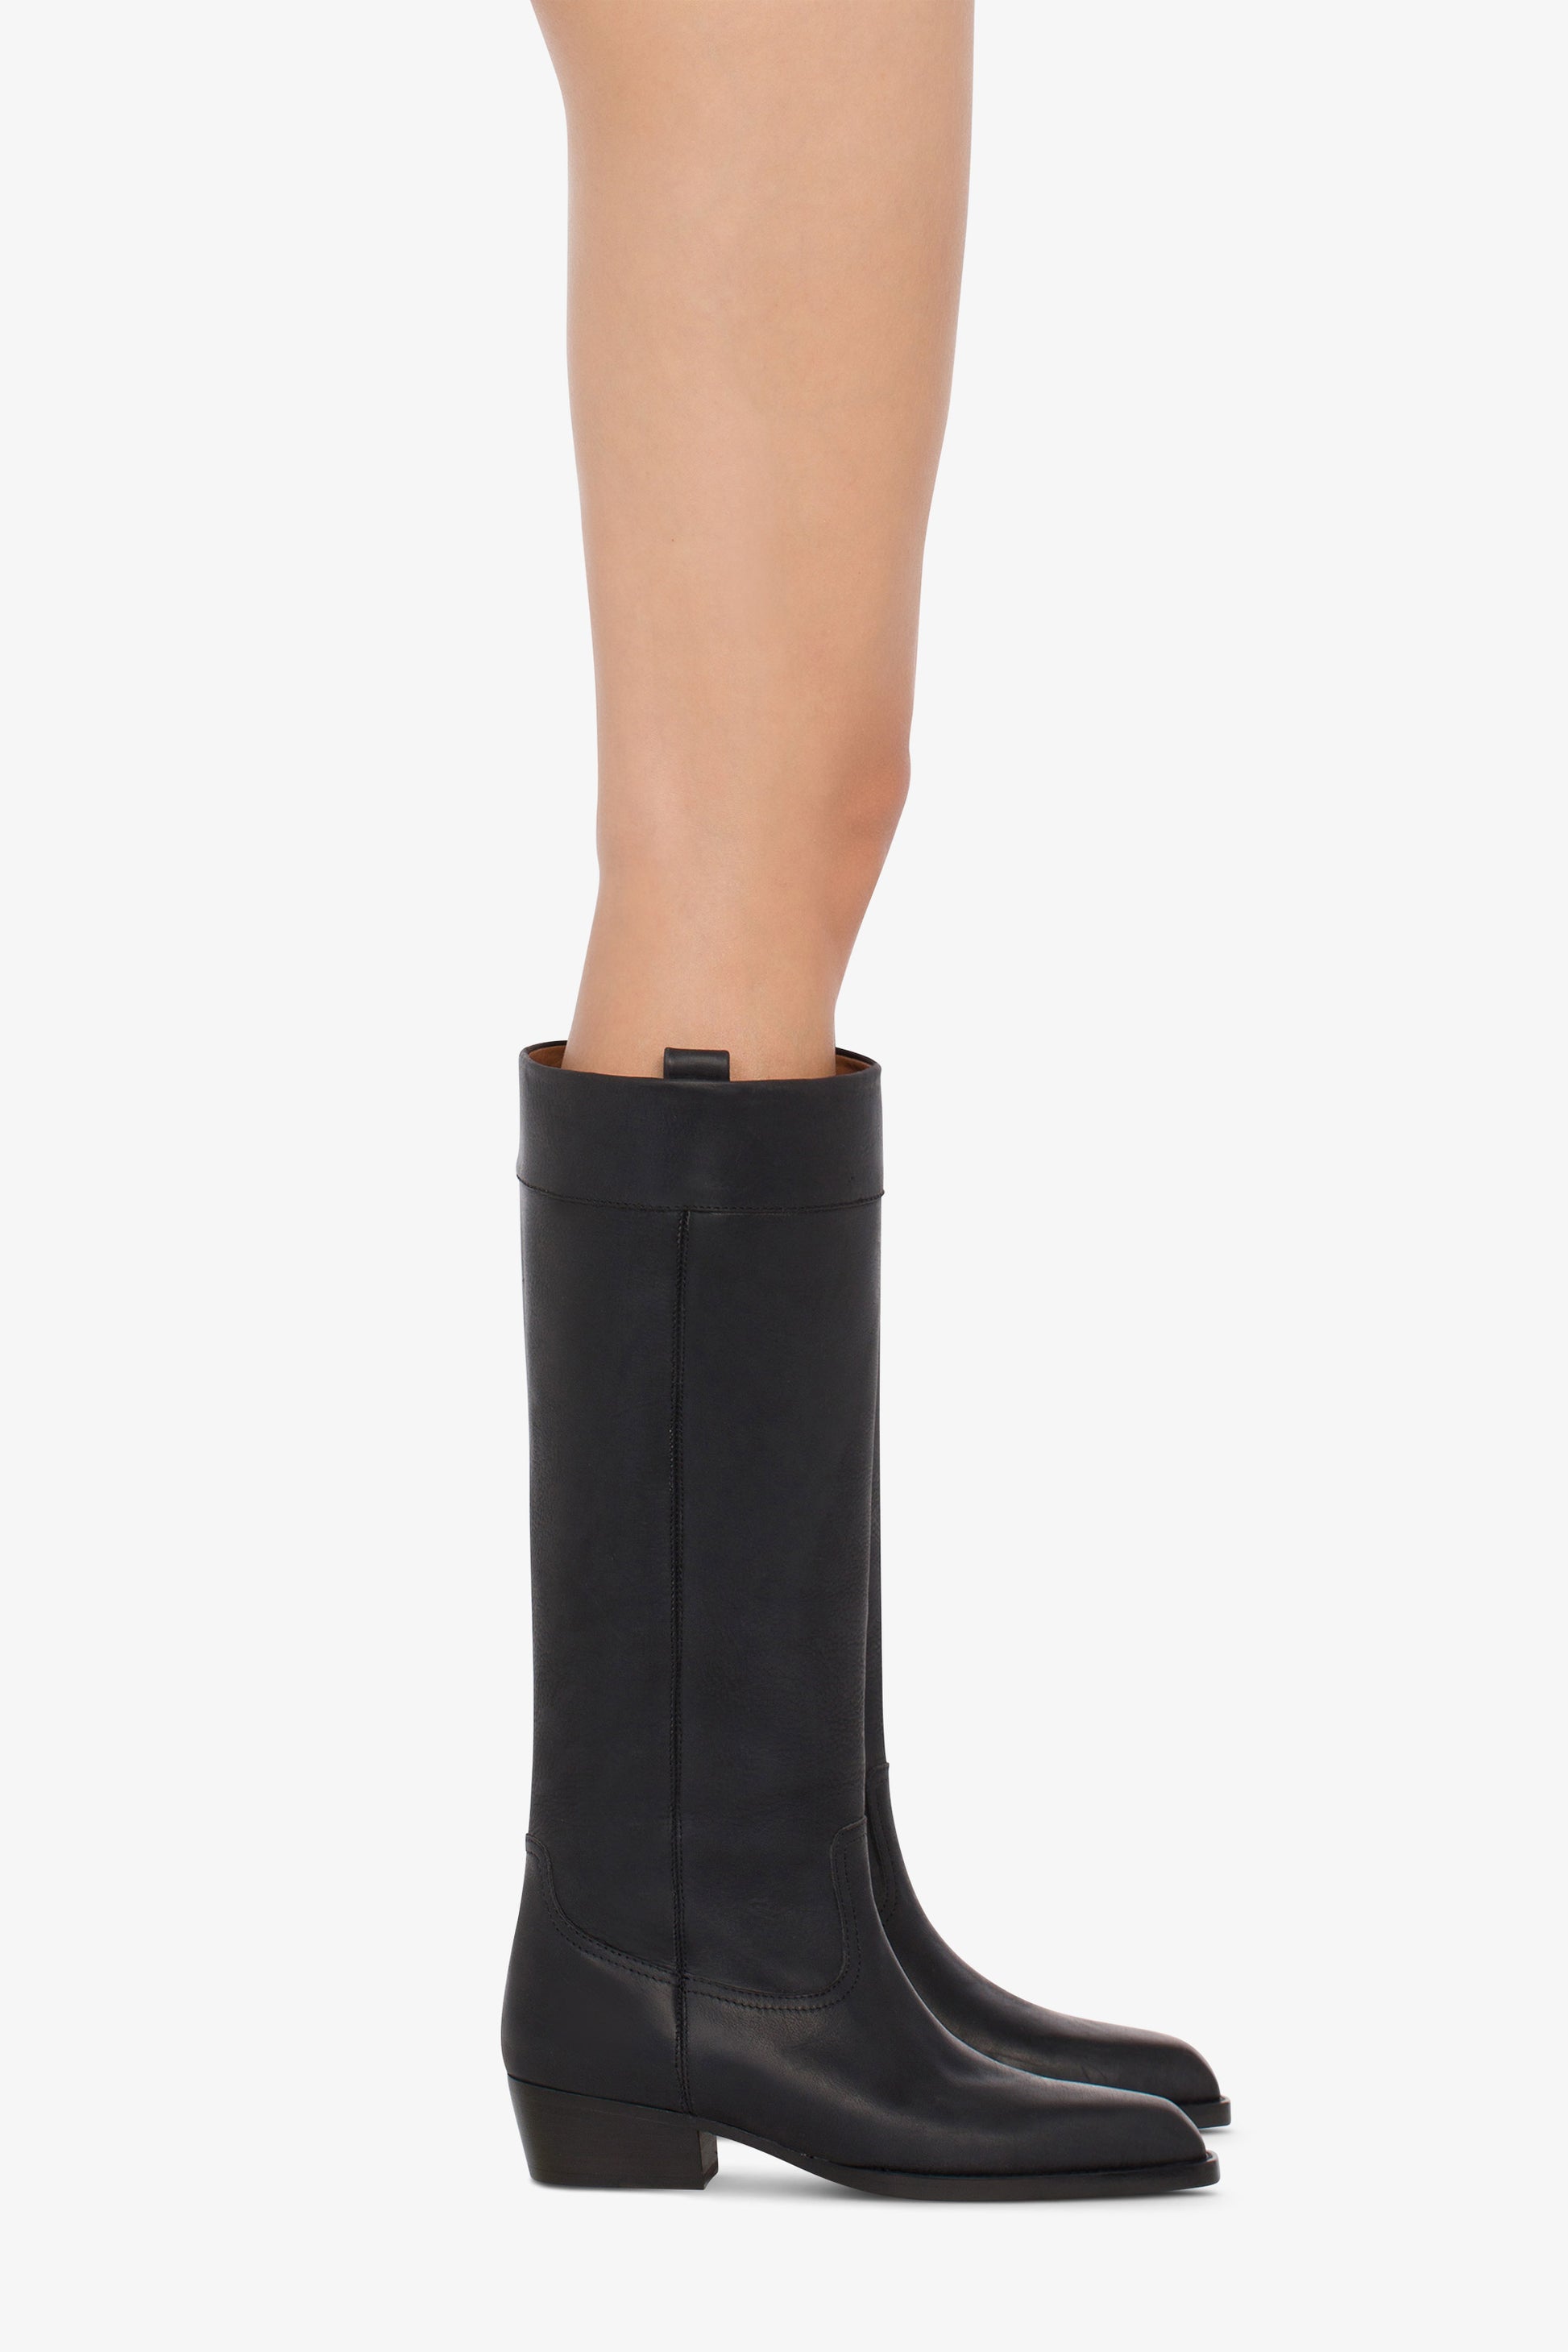 Calf-length boots in soft black pebble leather - Indossato